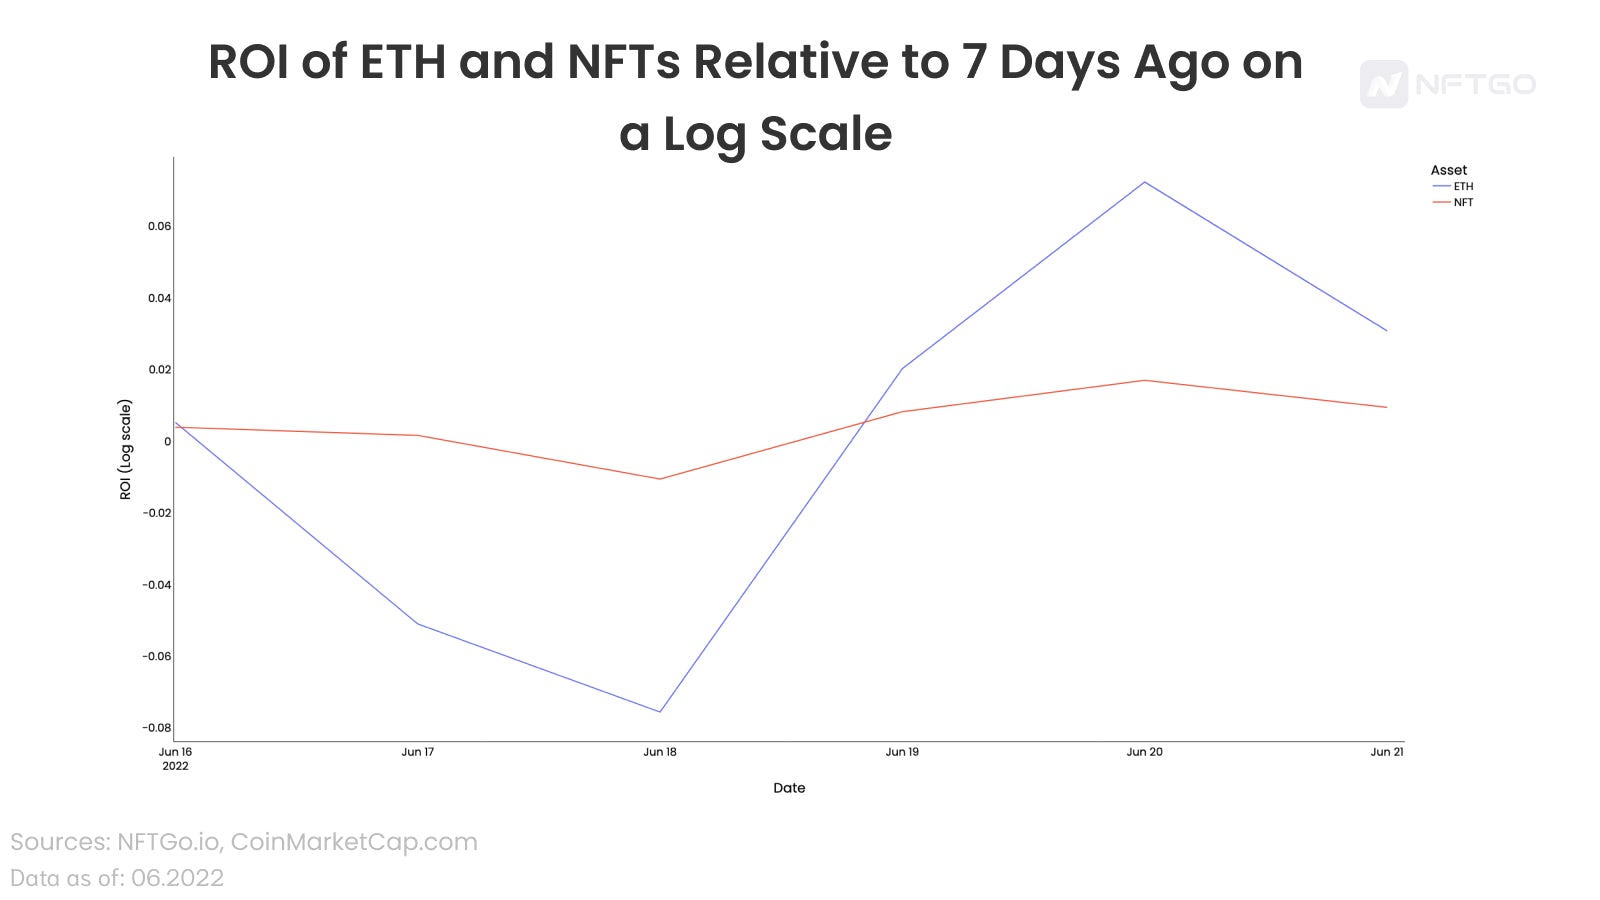 ROI of ETH and NFTs Relative to 7 Days Ago on a Log Scale 